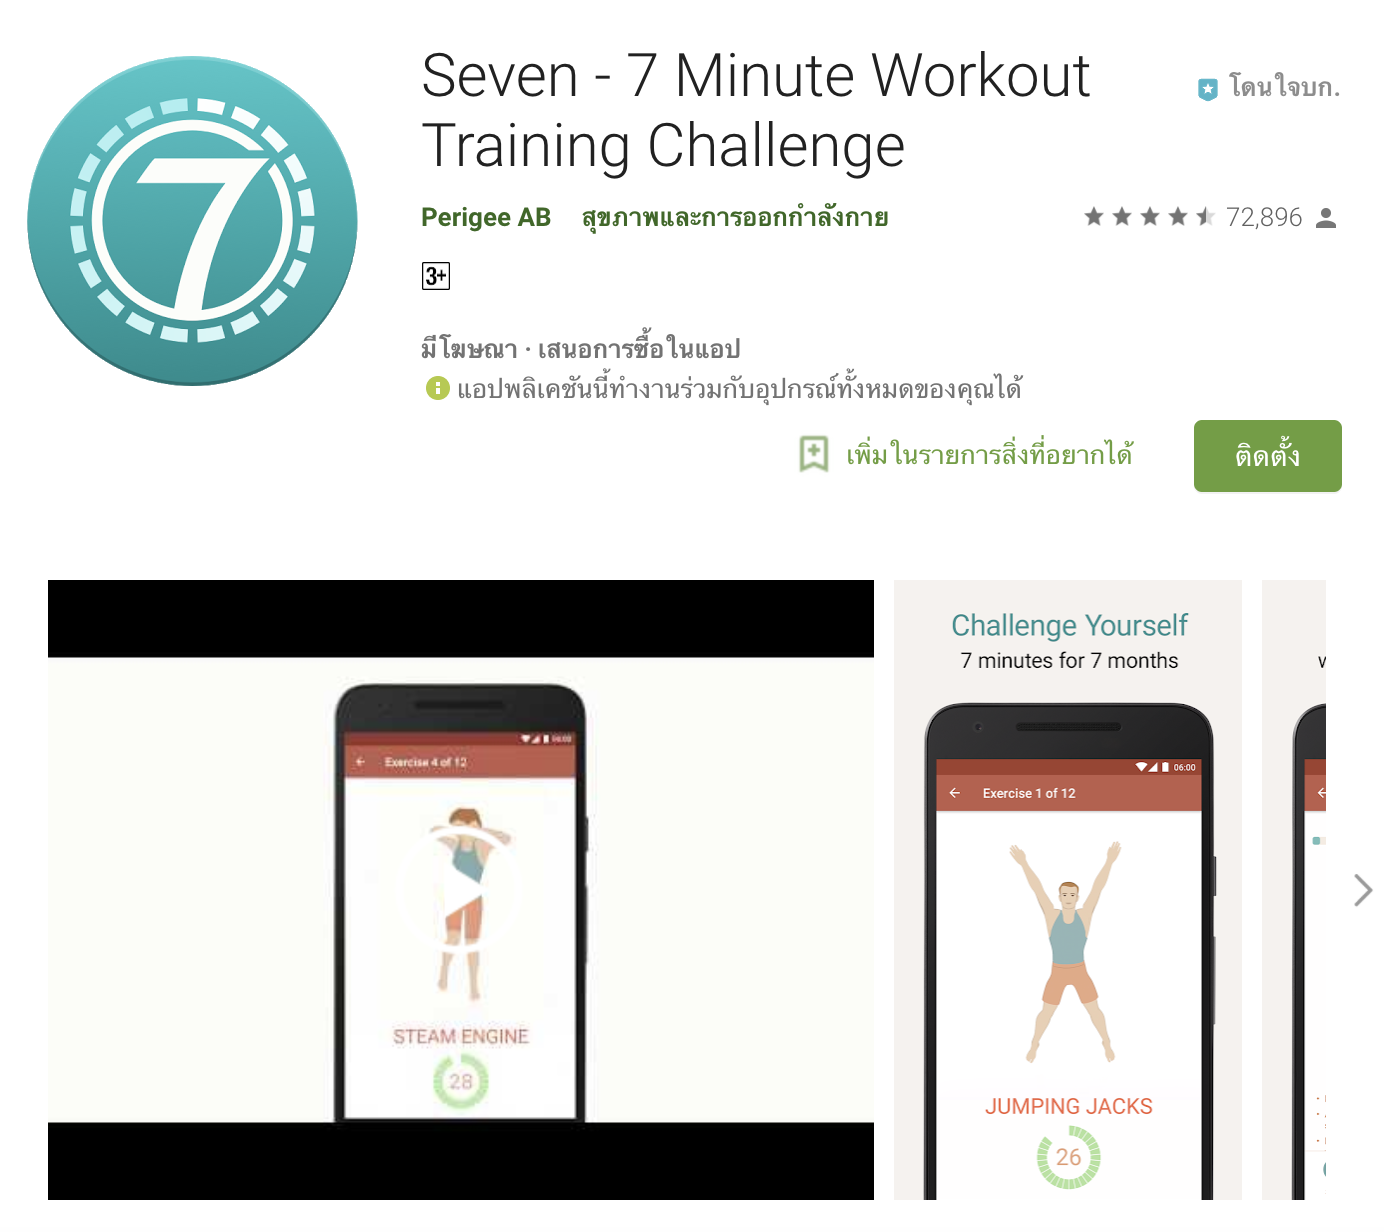 Seven - 7 Minute Workout Training Challenge